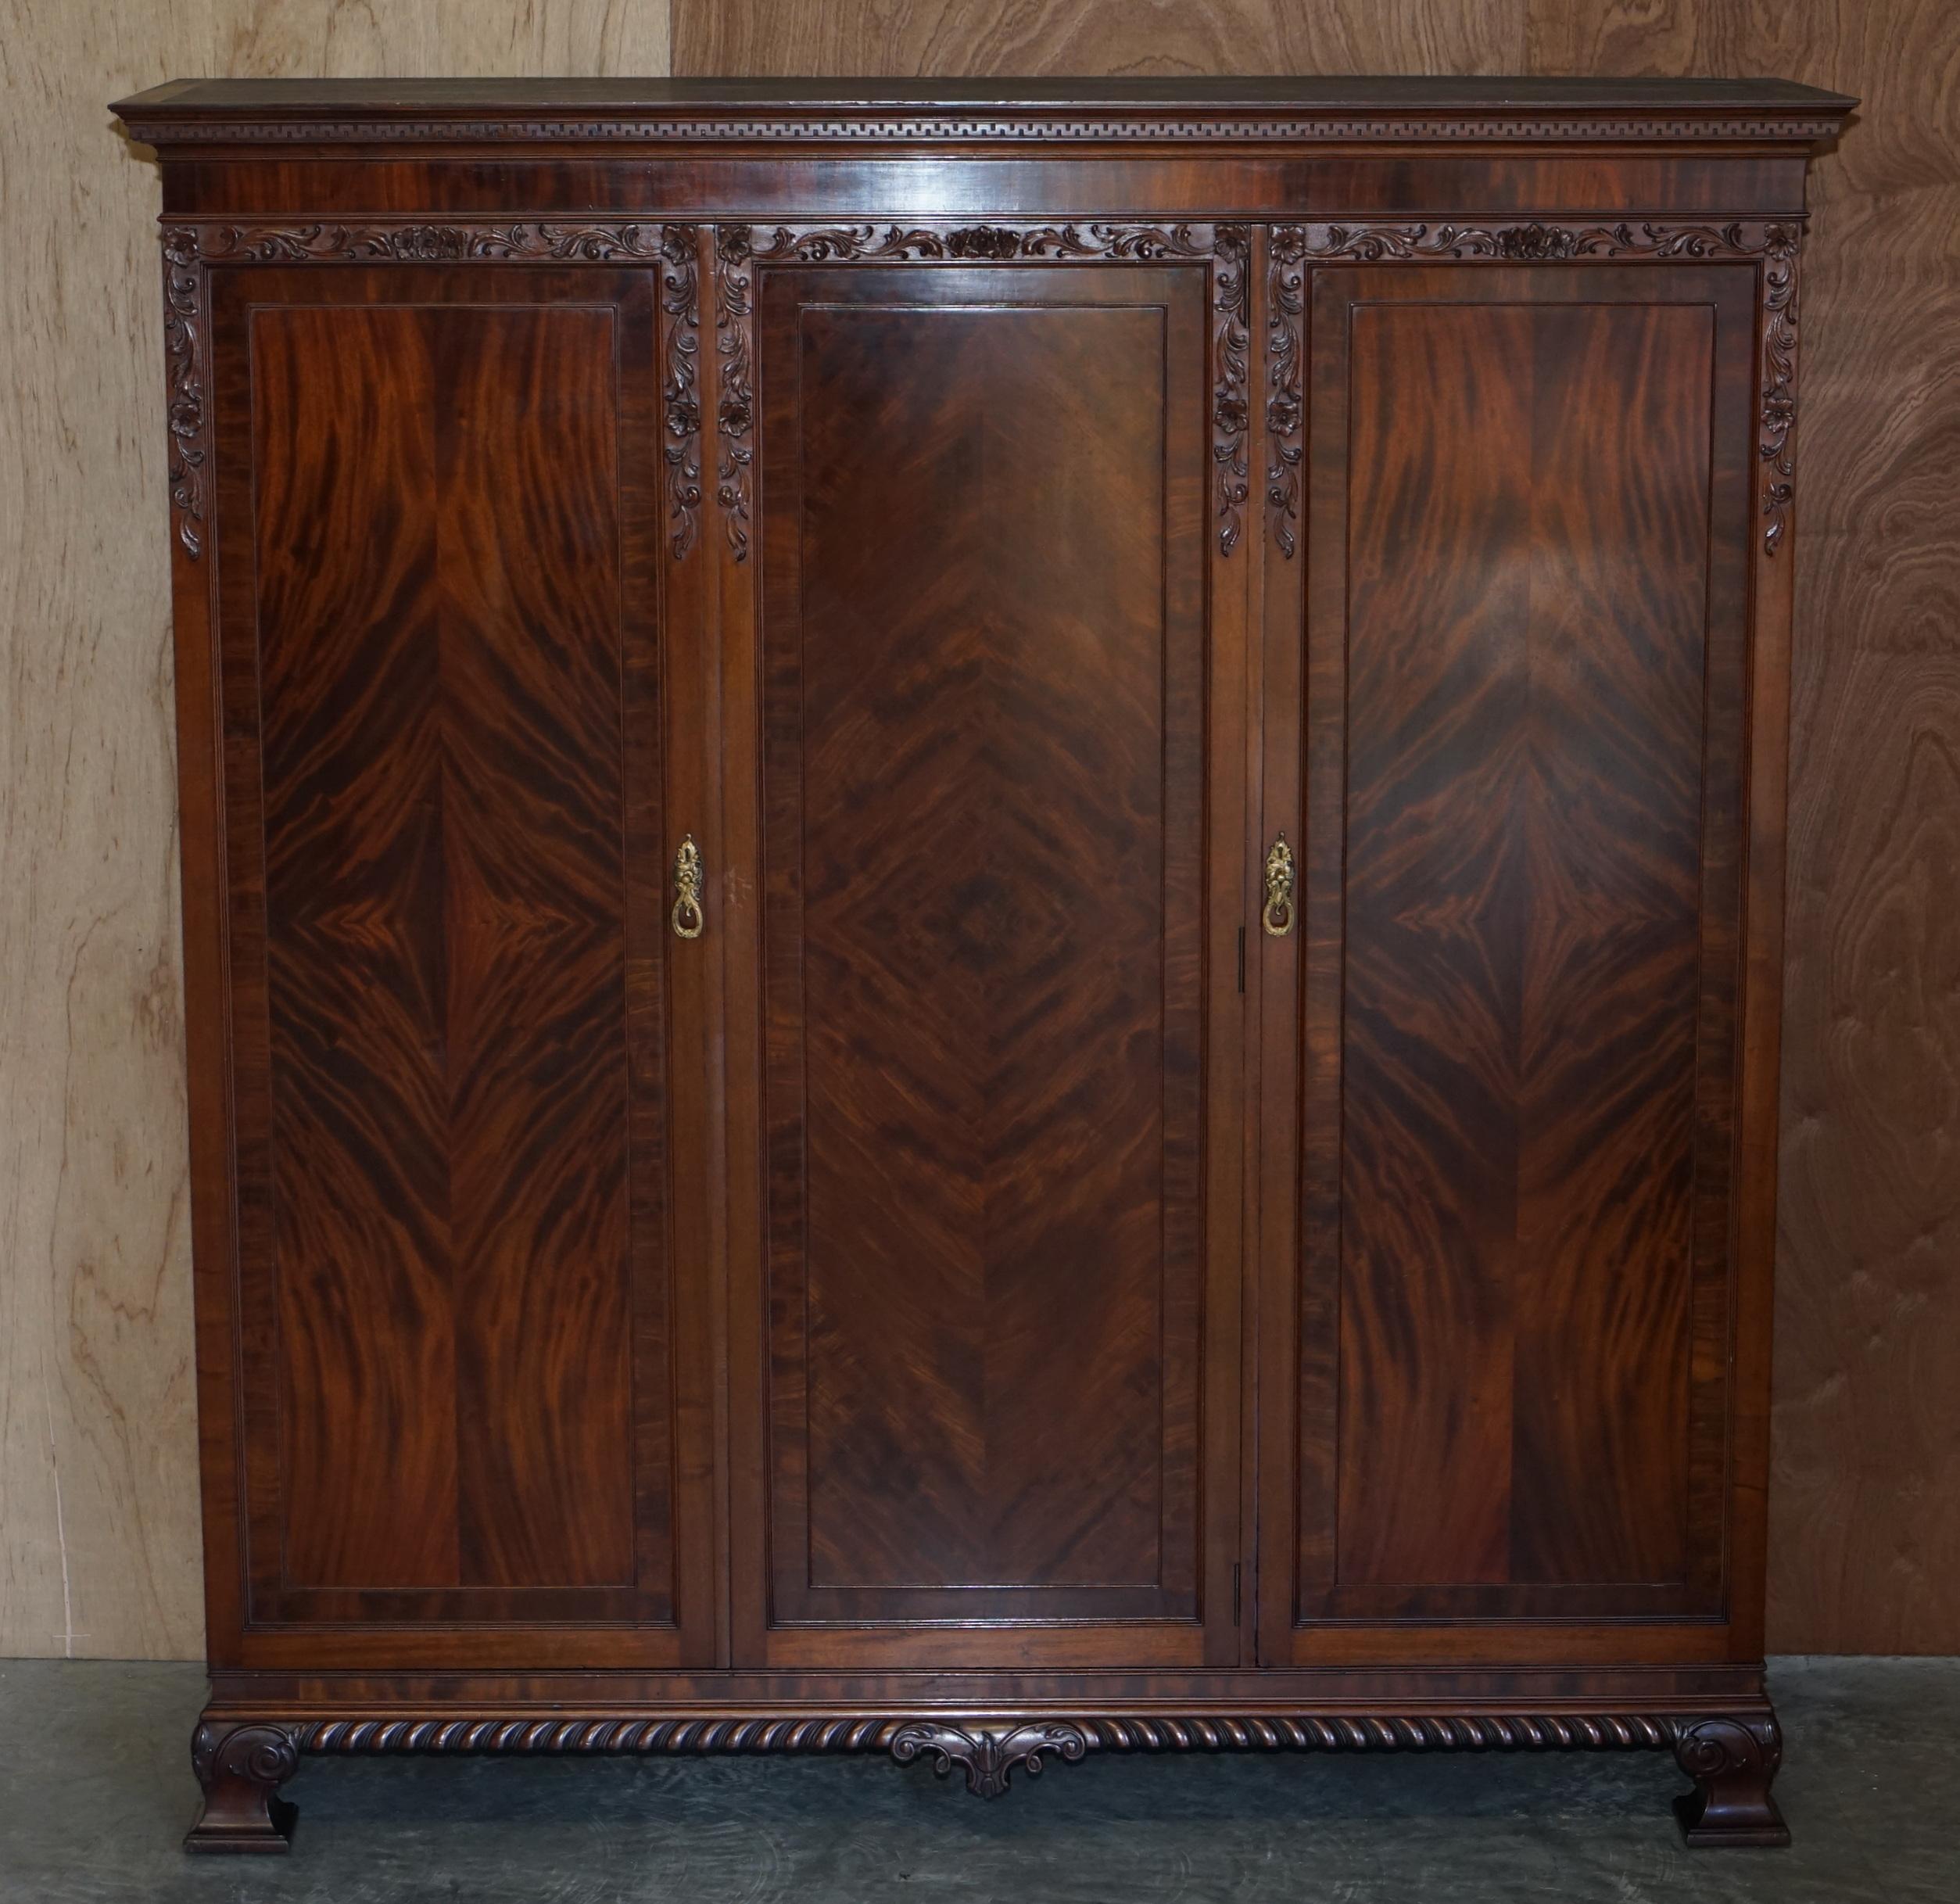 We are delighted to offer this exquisite quality circa 1900 Honduras Mahogany triple bank wardrobe with full length mirrored door panel and campaign drawers that can be dismantled

This wardrobe can be dismantled as mentioned for ease of access,